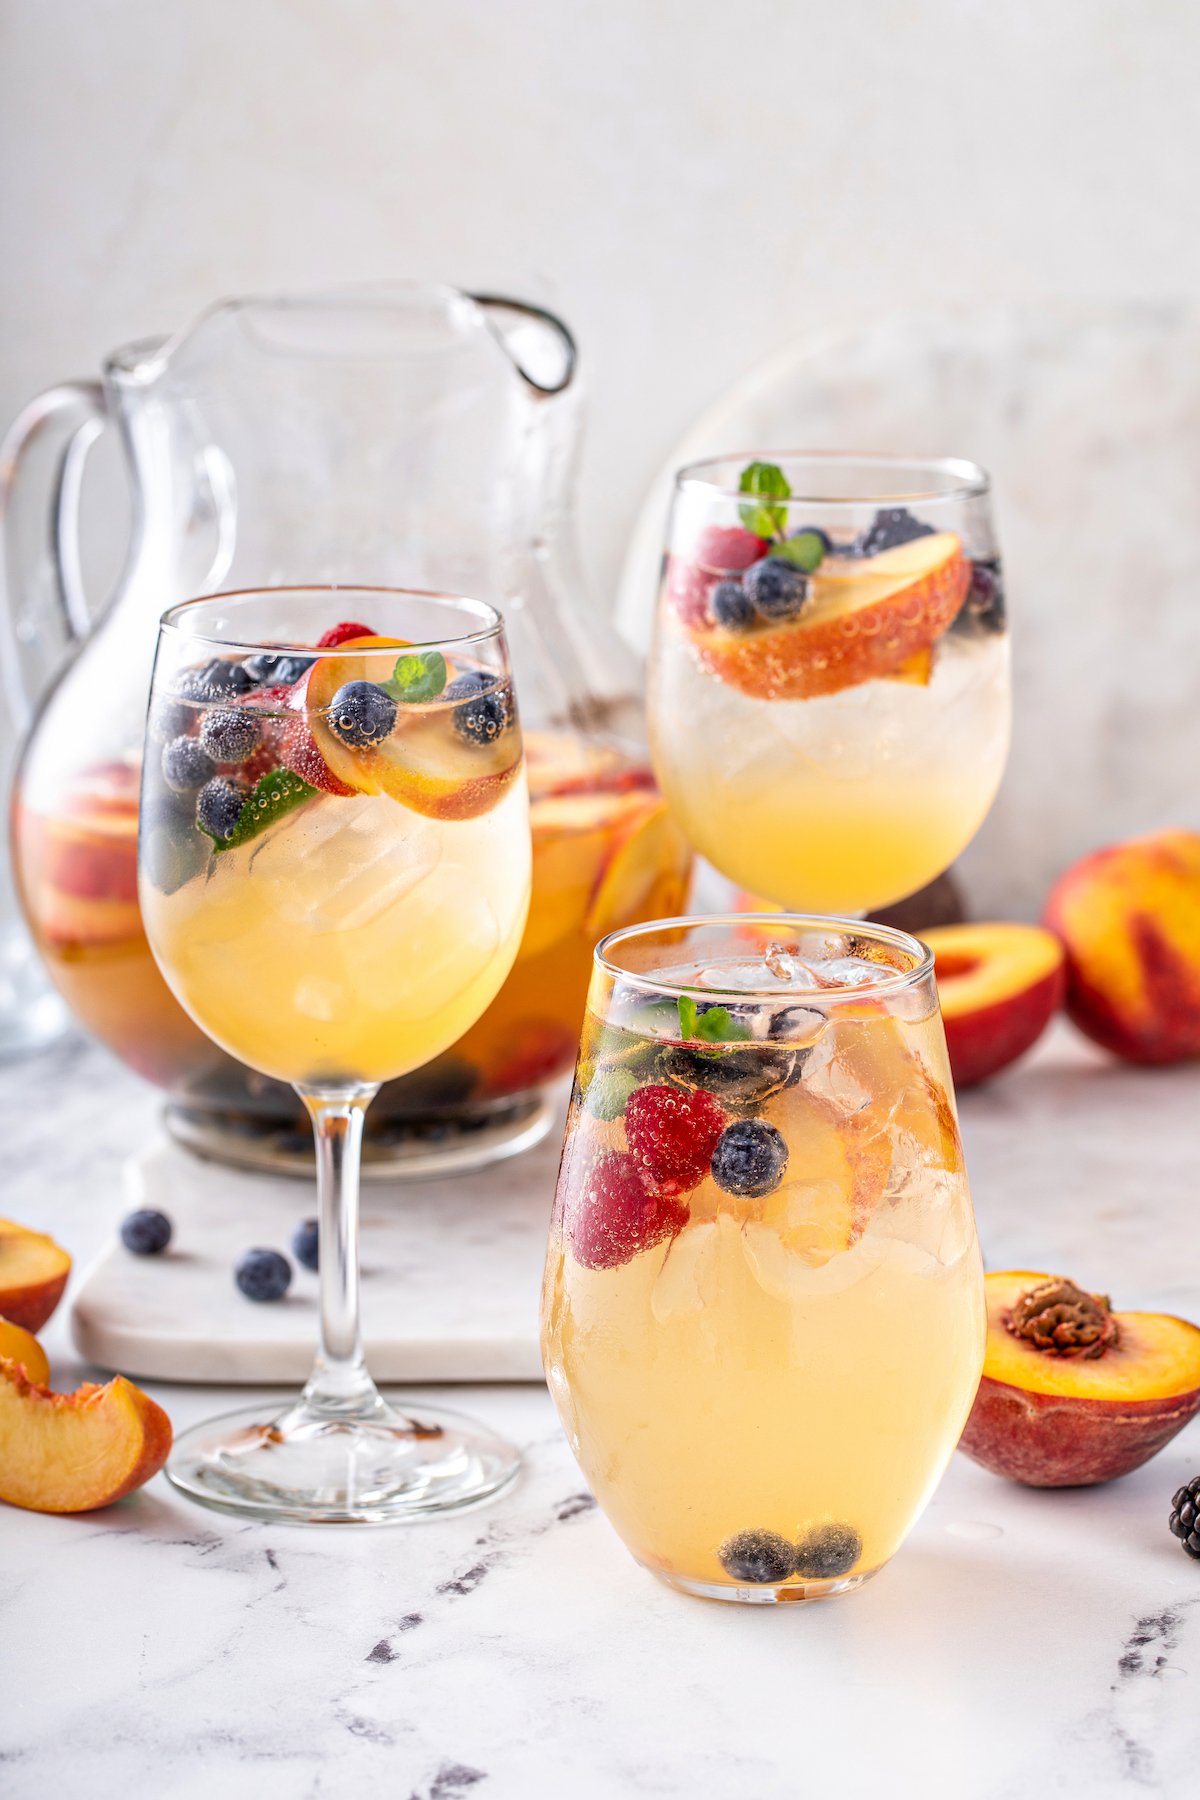 Glasses of white peach sangria with blueberries and strawberries.